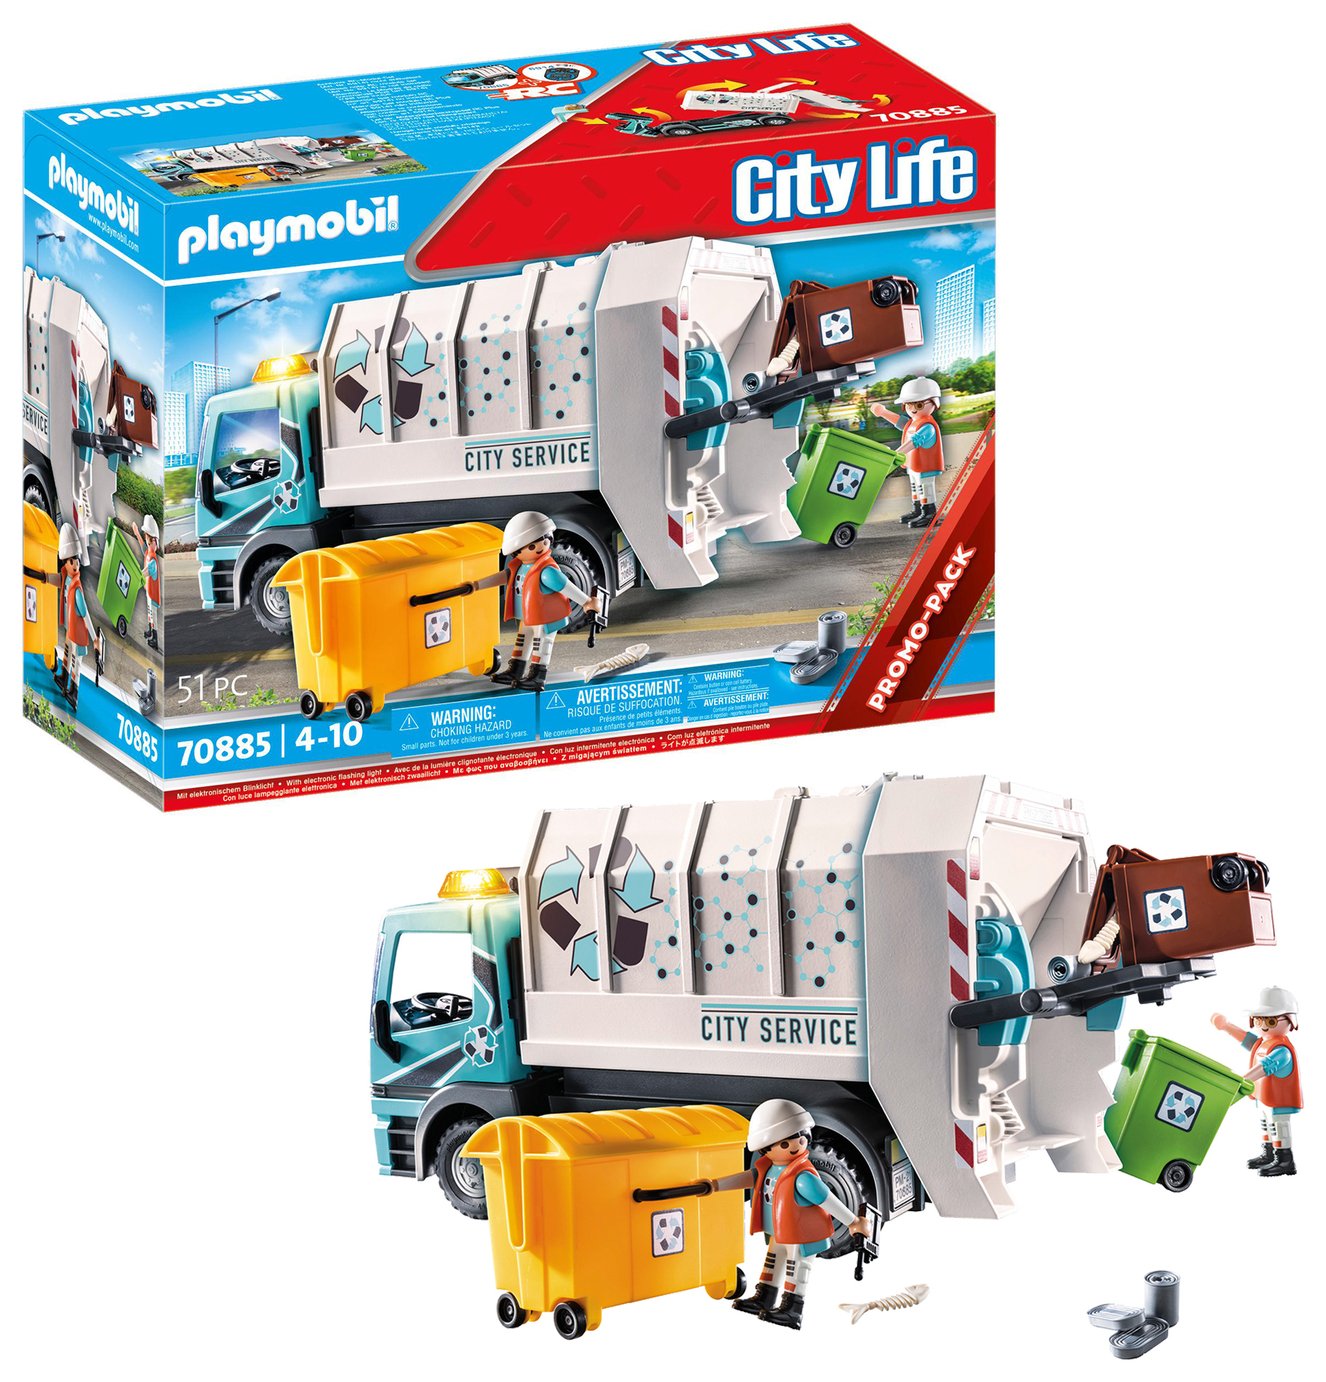 Citylife Playmobil 70885 Recycling Truck review